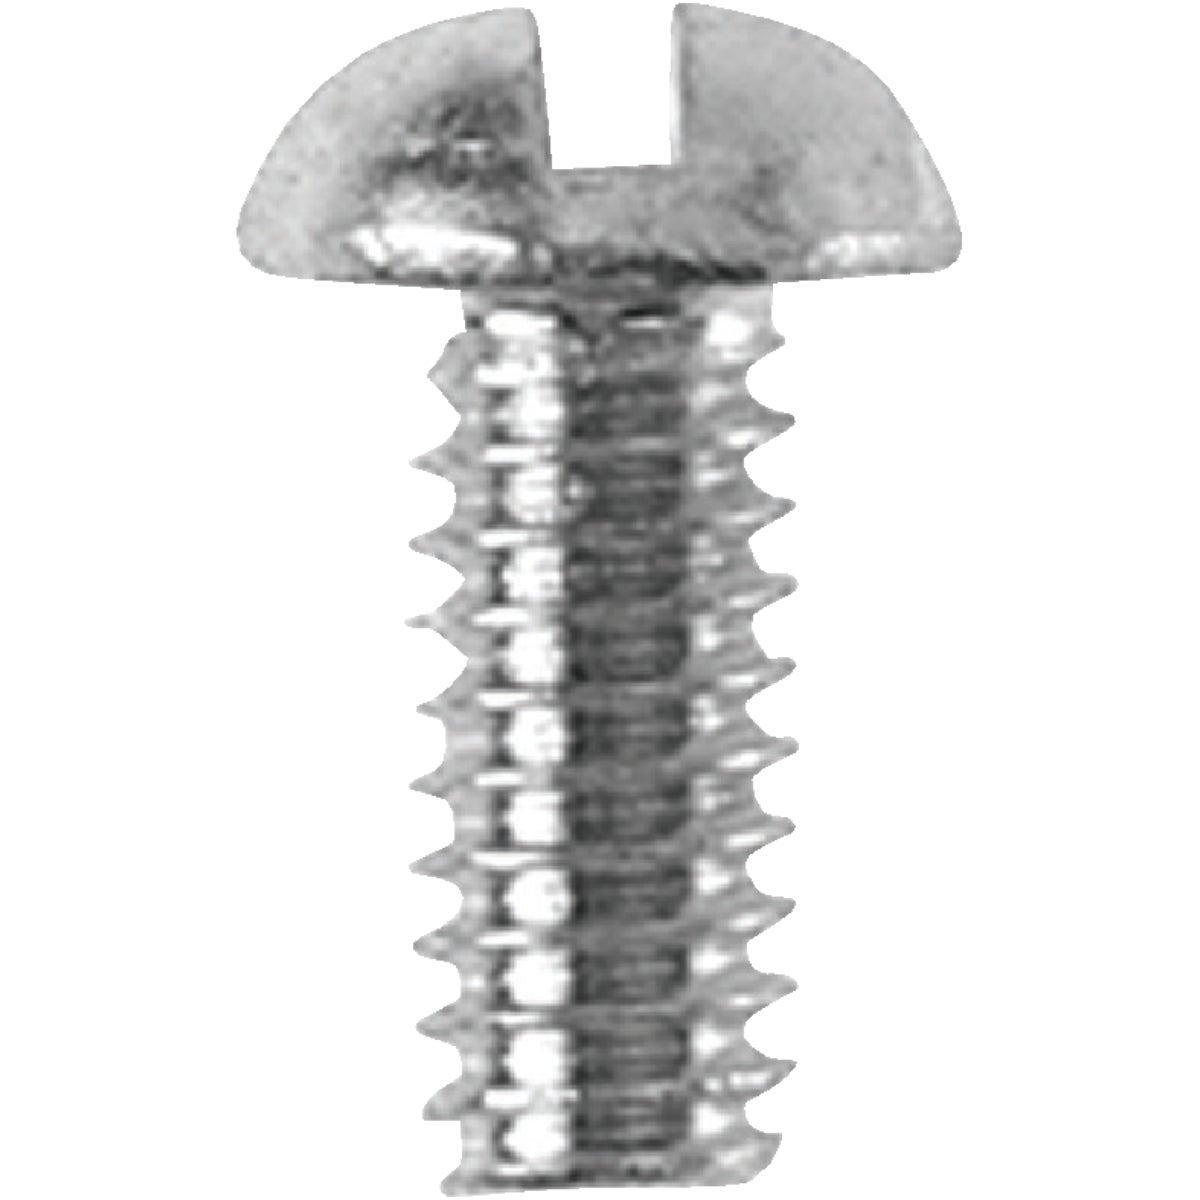 Item 436275, Solid brass faucet bibb screw is triple chrome-plated.